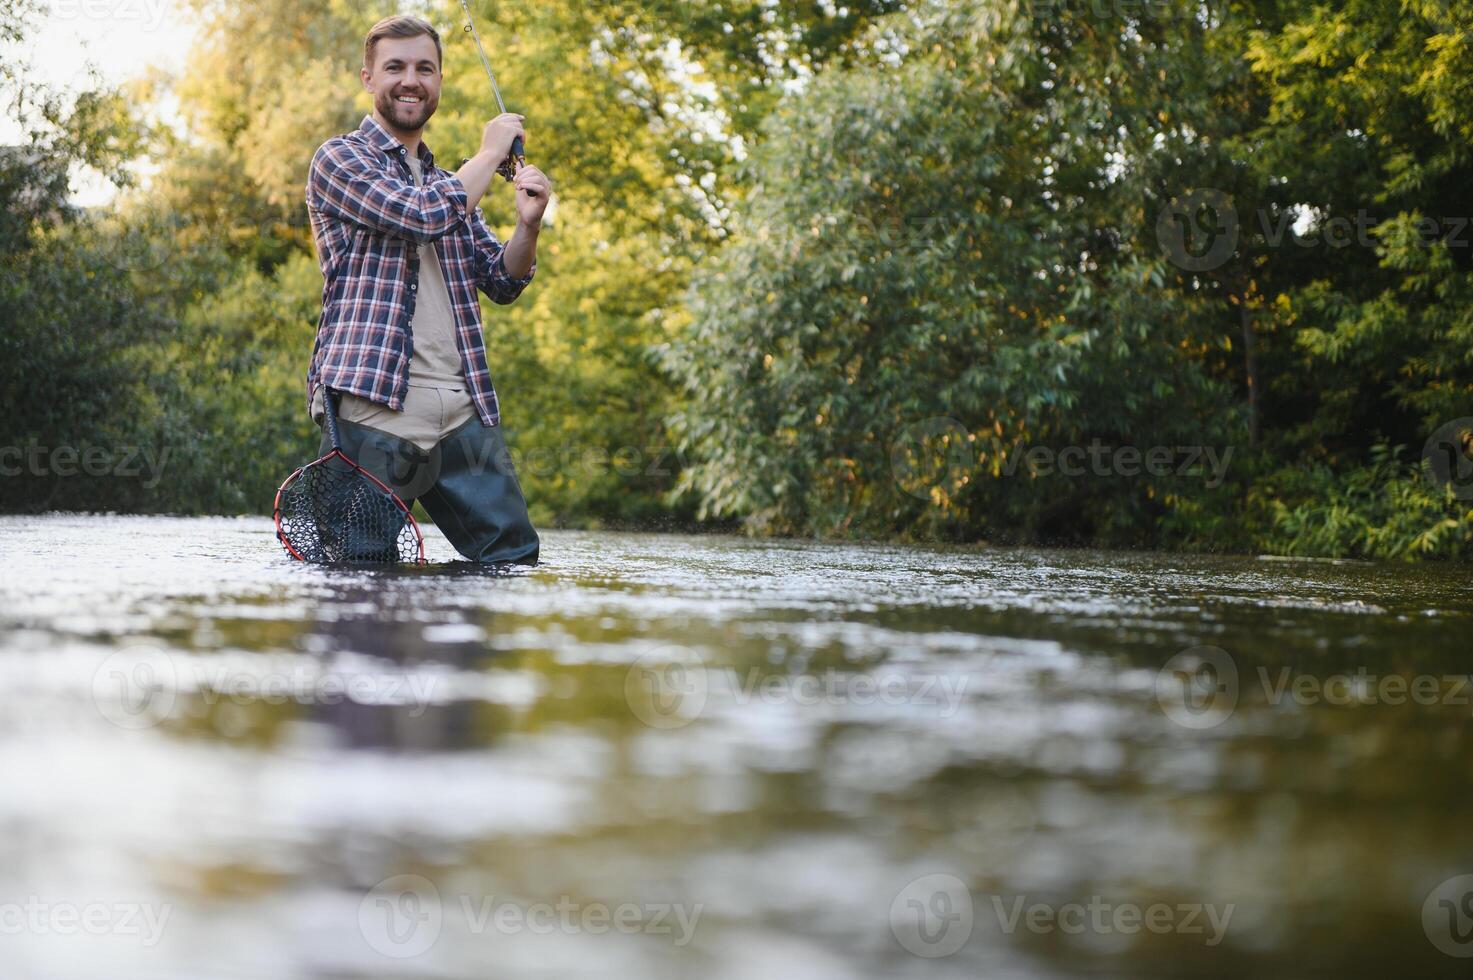 Man with fishing rod, fisherman men in river water outdoor. Catching trout fish in net. Summer fishing hobby photo